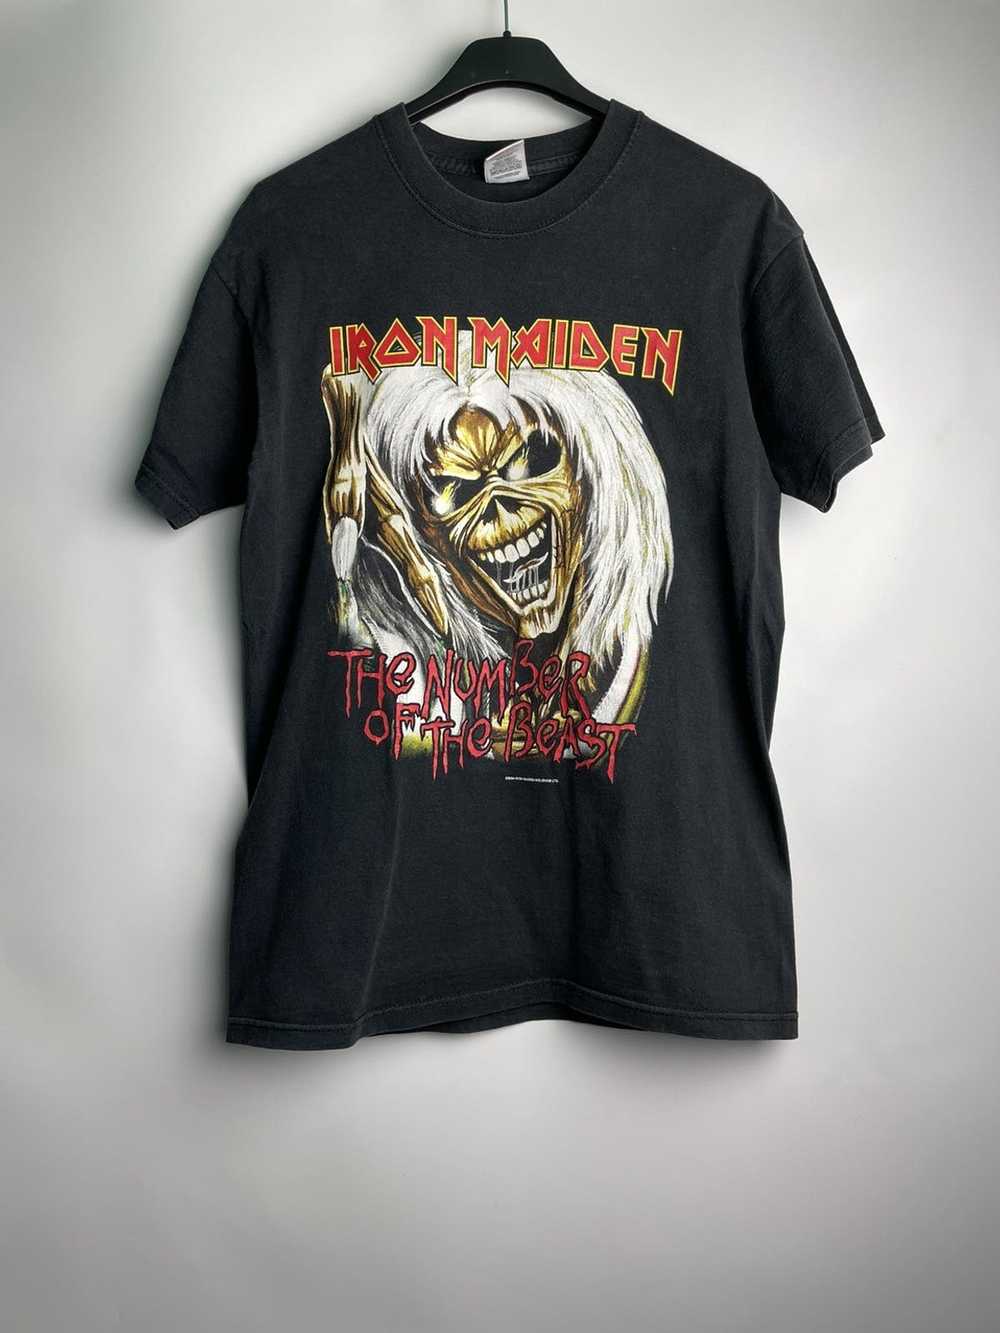 Band Tees × Iron Maiden × Rock T Shirt Vintage t-… - image 1